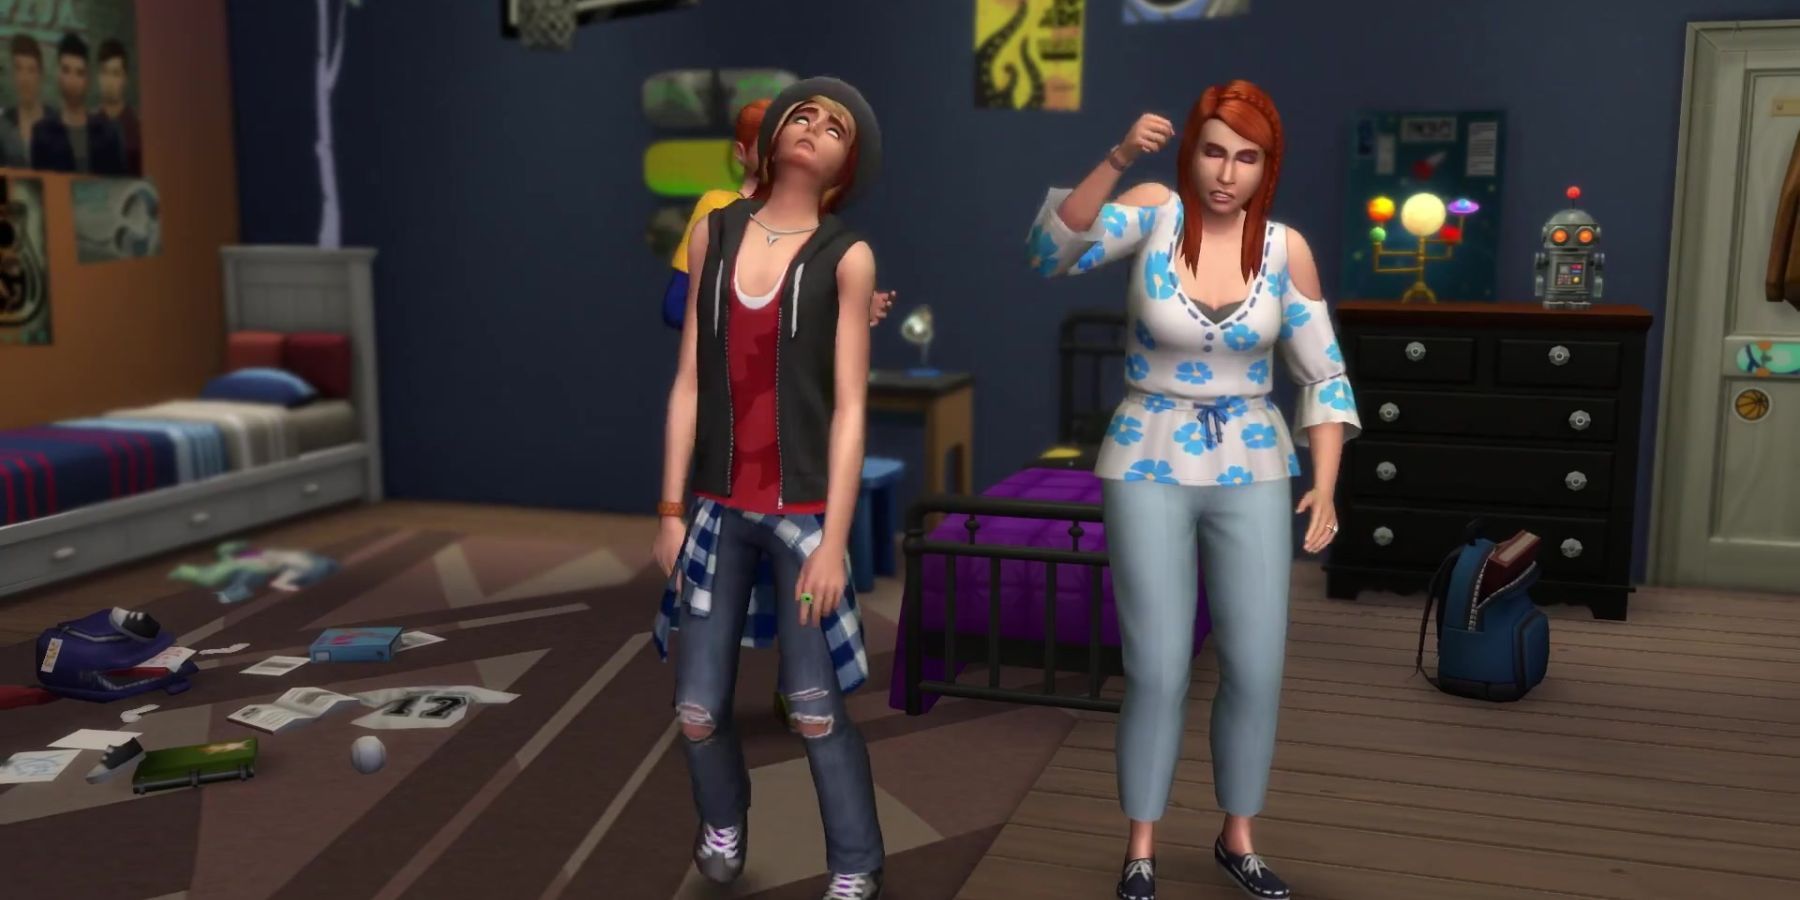 The Sims 4 Delinquent Teen Mod